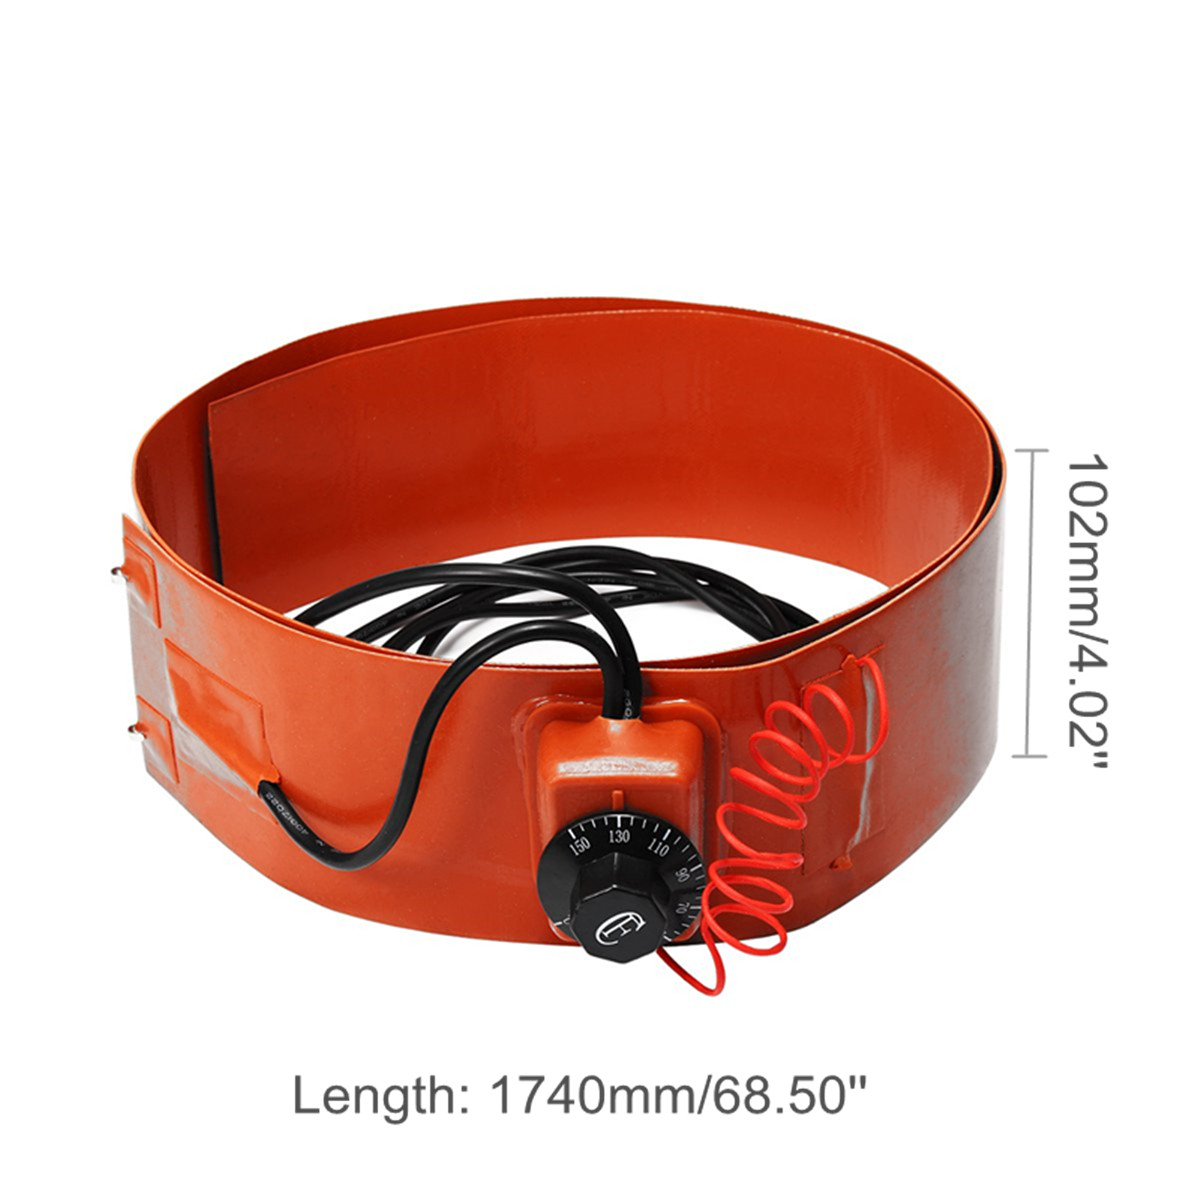 Challenger-Silicone-Drum-Heater-700w-120-VAC-Thermostat-Controlled-for-WVO-Bio-Replacement-Accessori-1457257